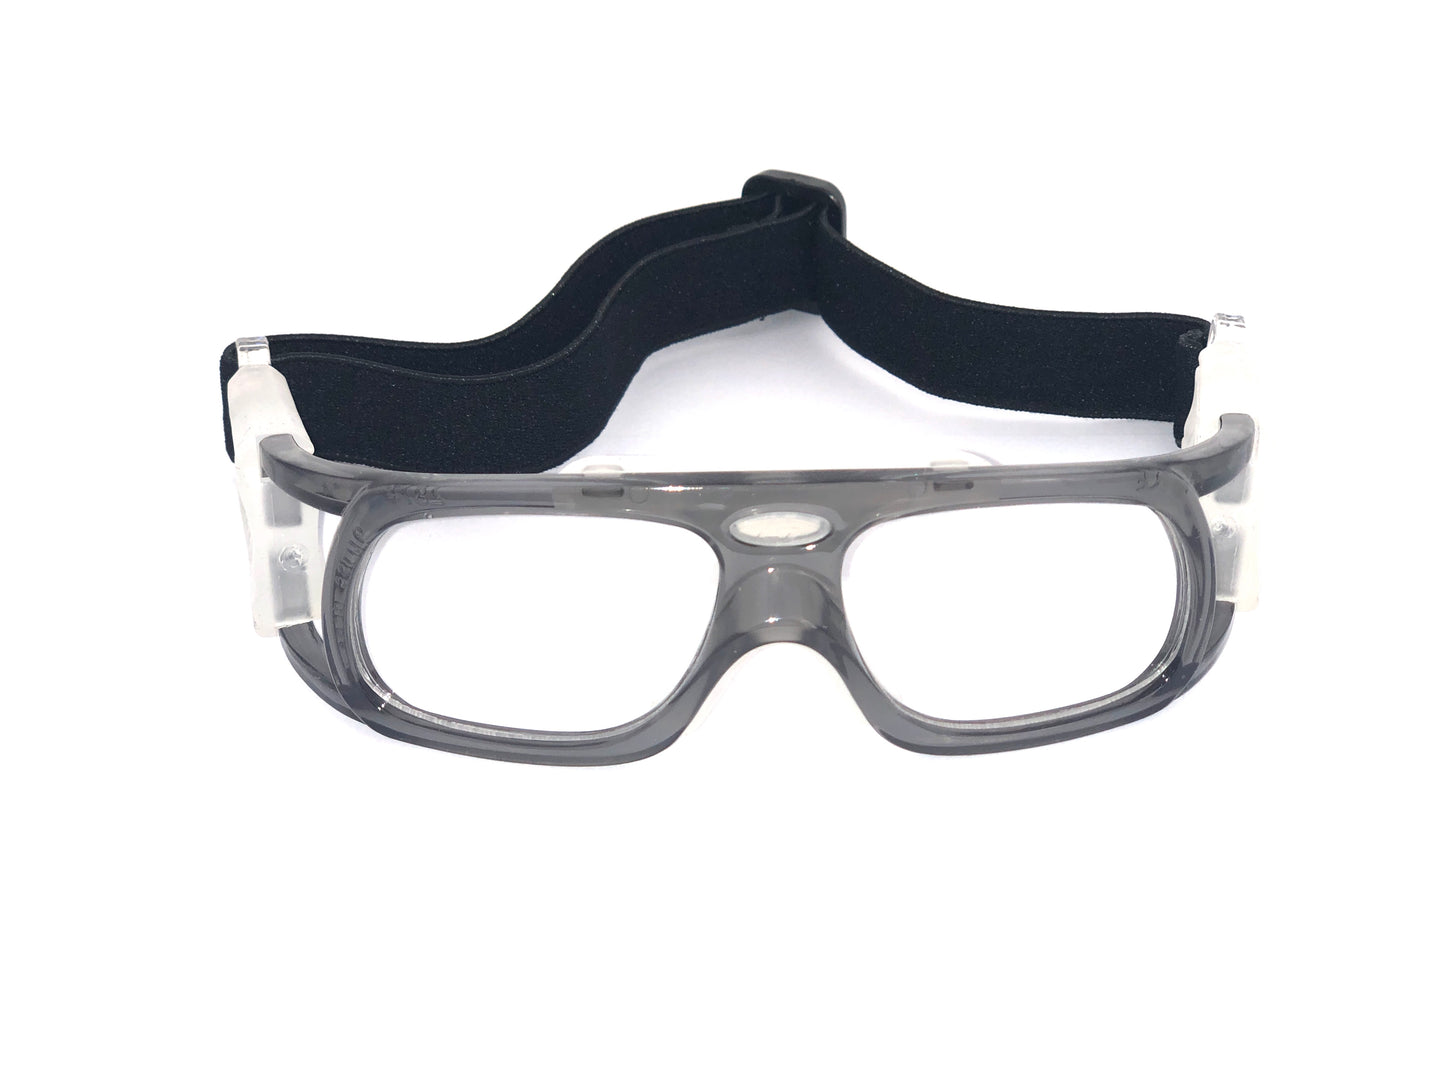 Professional Sports Protective Goggles For Adults With Prescription